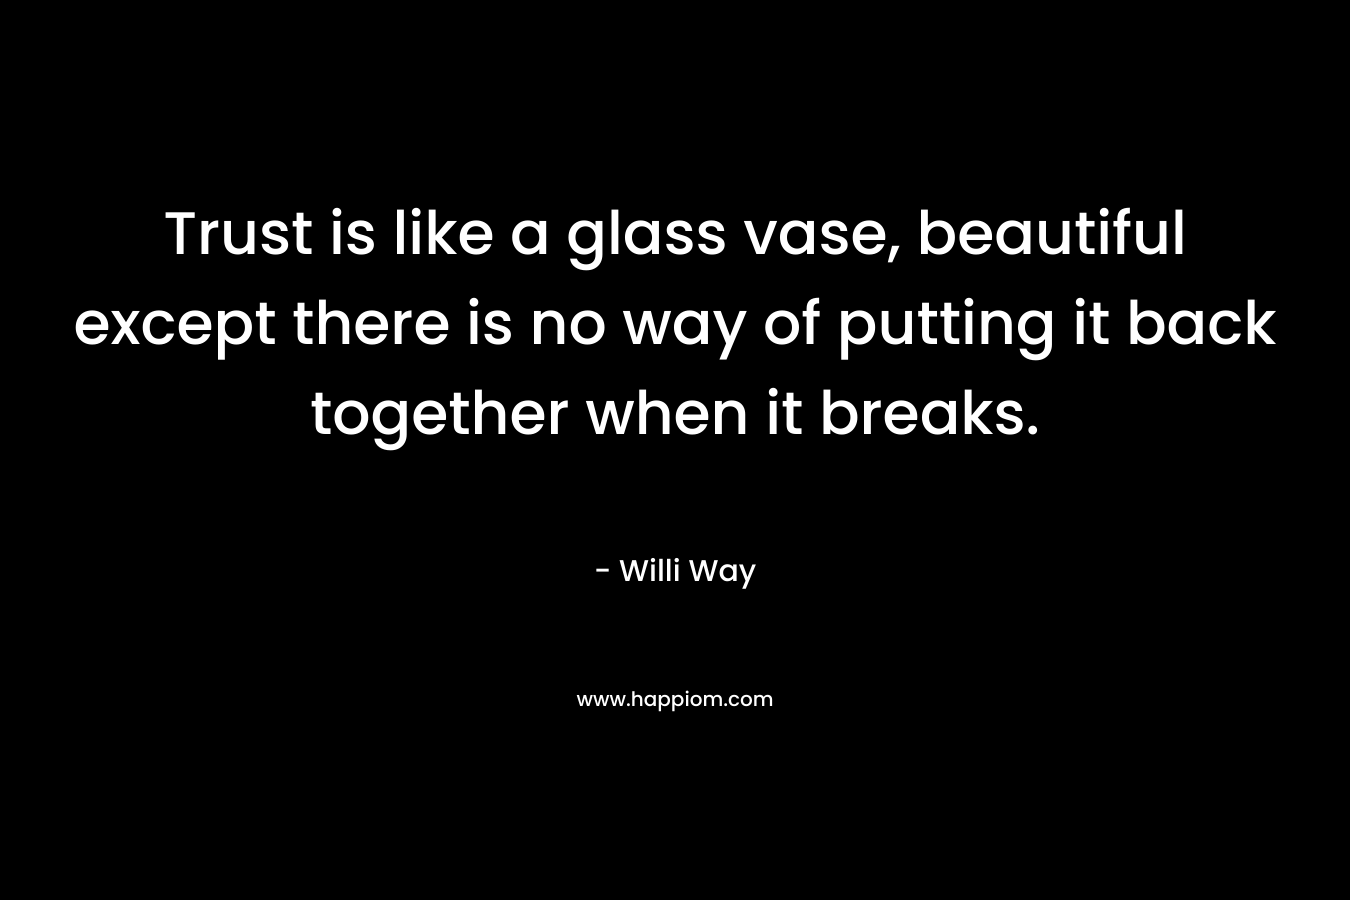 Trust is like a glass vase, beautiful except there is no way of putting it back together when it breaks. – Willi Way